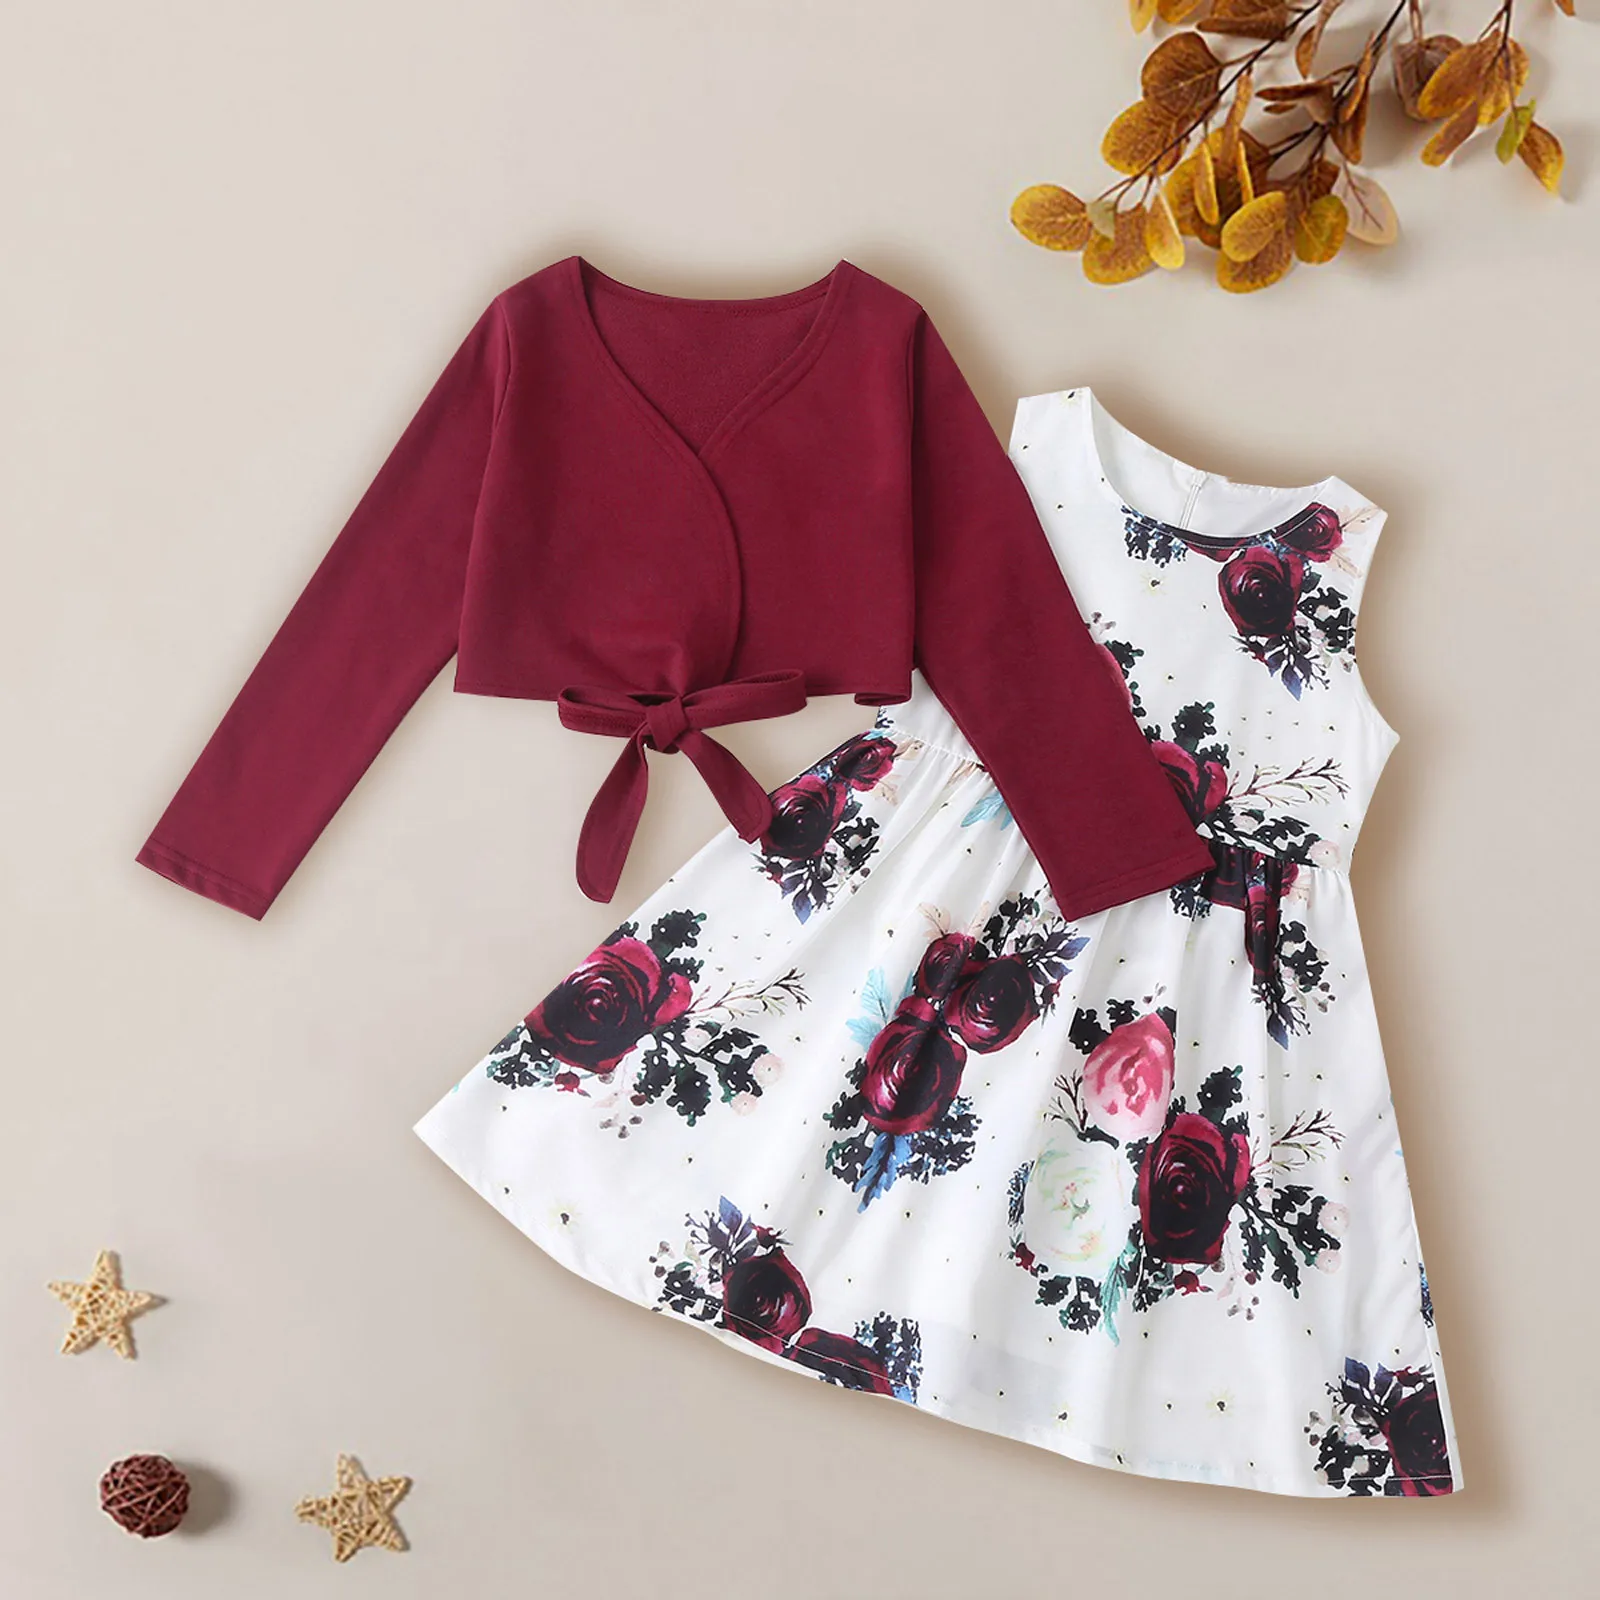 Toddler Kids Baby Girls Clothes Solid Tops +Floral Print Princess Dress Autumn Outfit Sets Girl Dress Clothing 4 5 6 7 8 9 Years